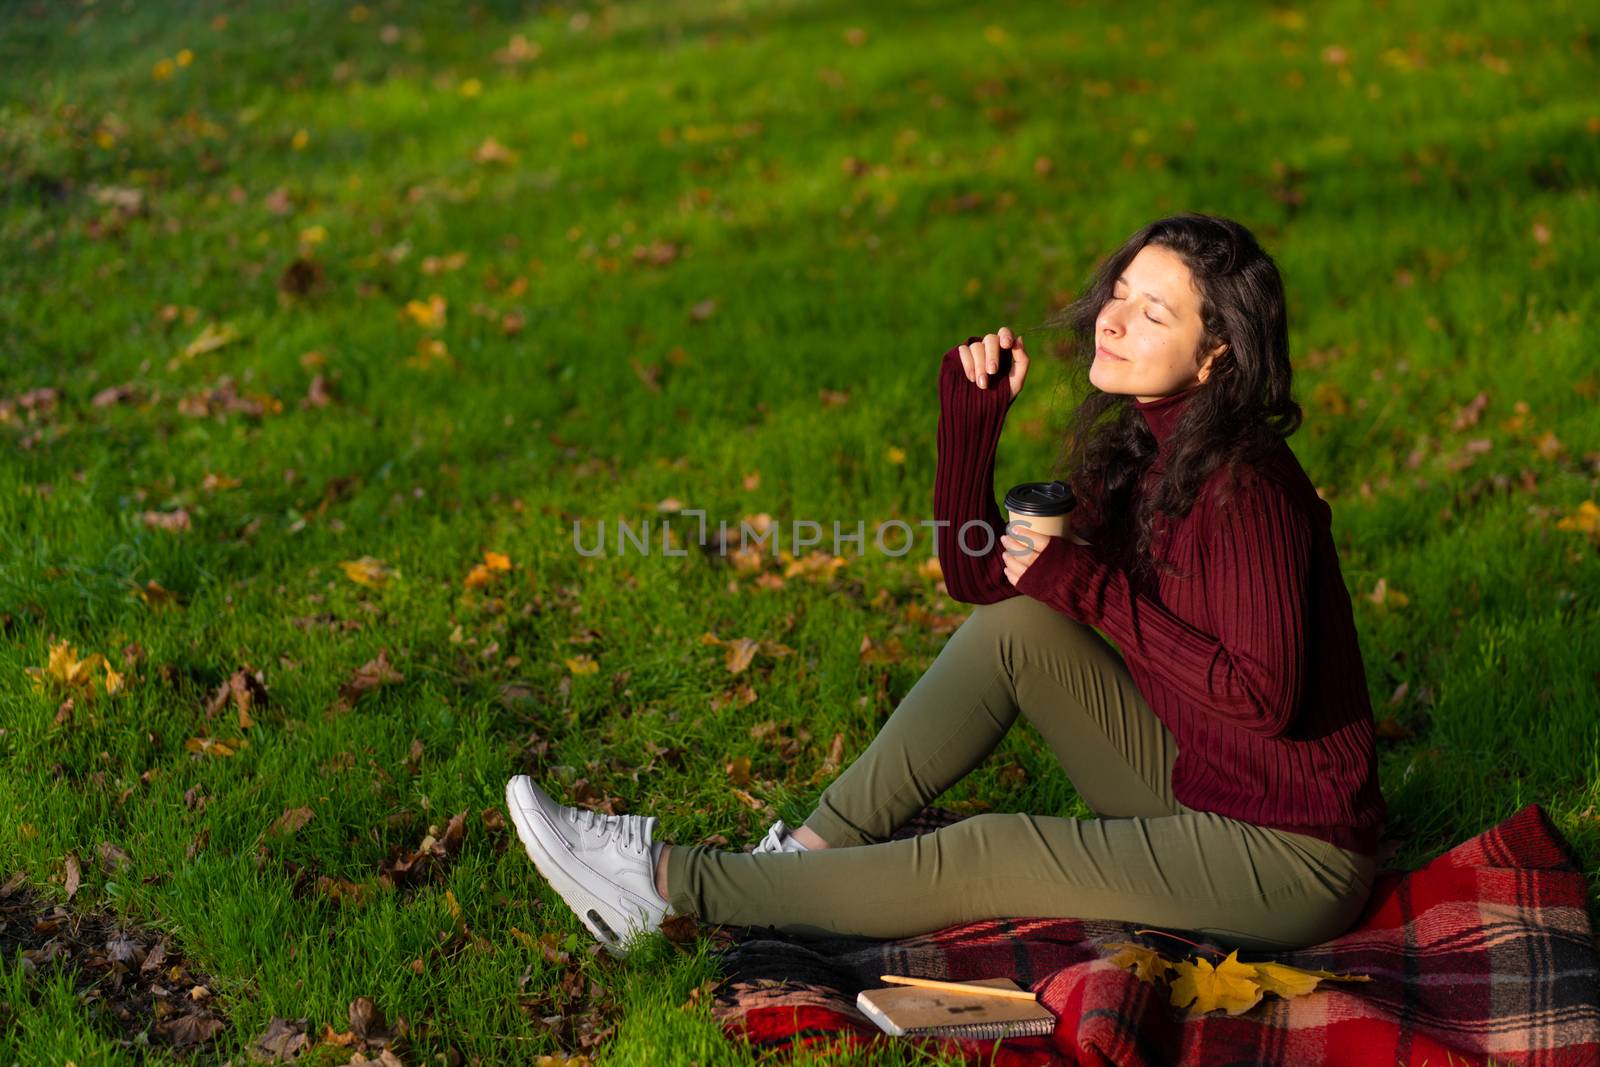 Pretty girl enjoys autumn and the beauty of nature sitting on a green lawn in the park. Autumn mood.